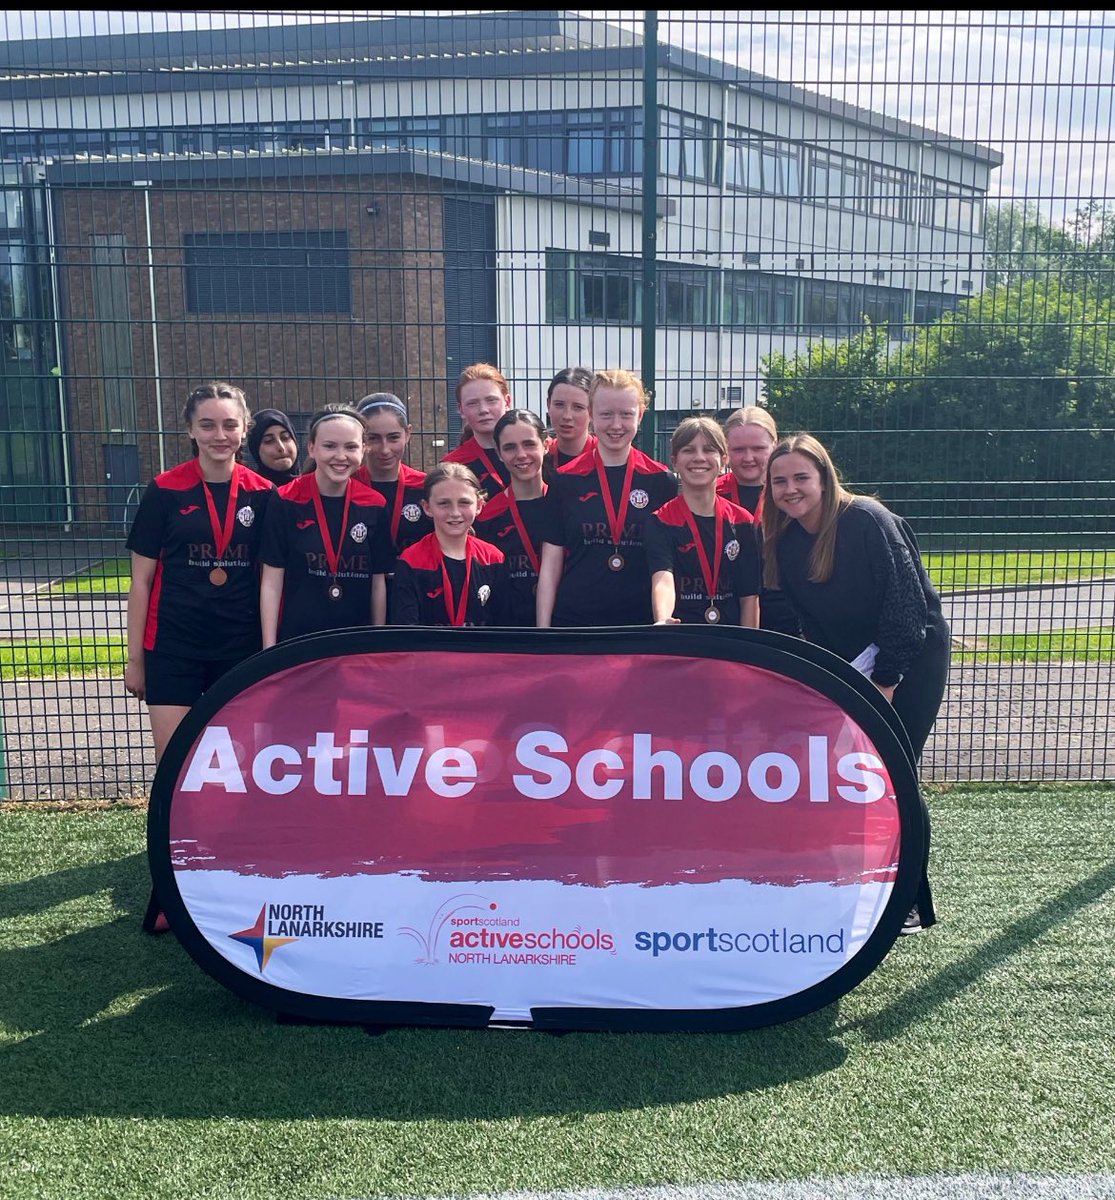 Well done to our S1/S2 girls football team for coming 3rd in the NL League!! Very proud of you all !! #proud #alwaysambees 💛🐝🎉 @st_ambrose_pe @stambrosehigh